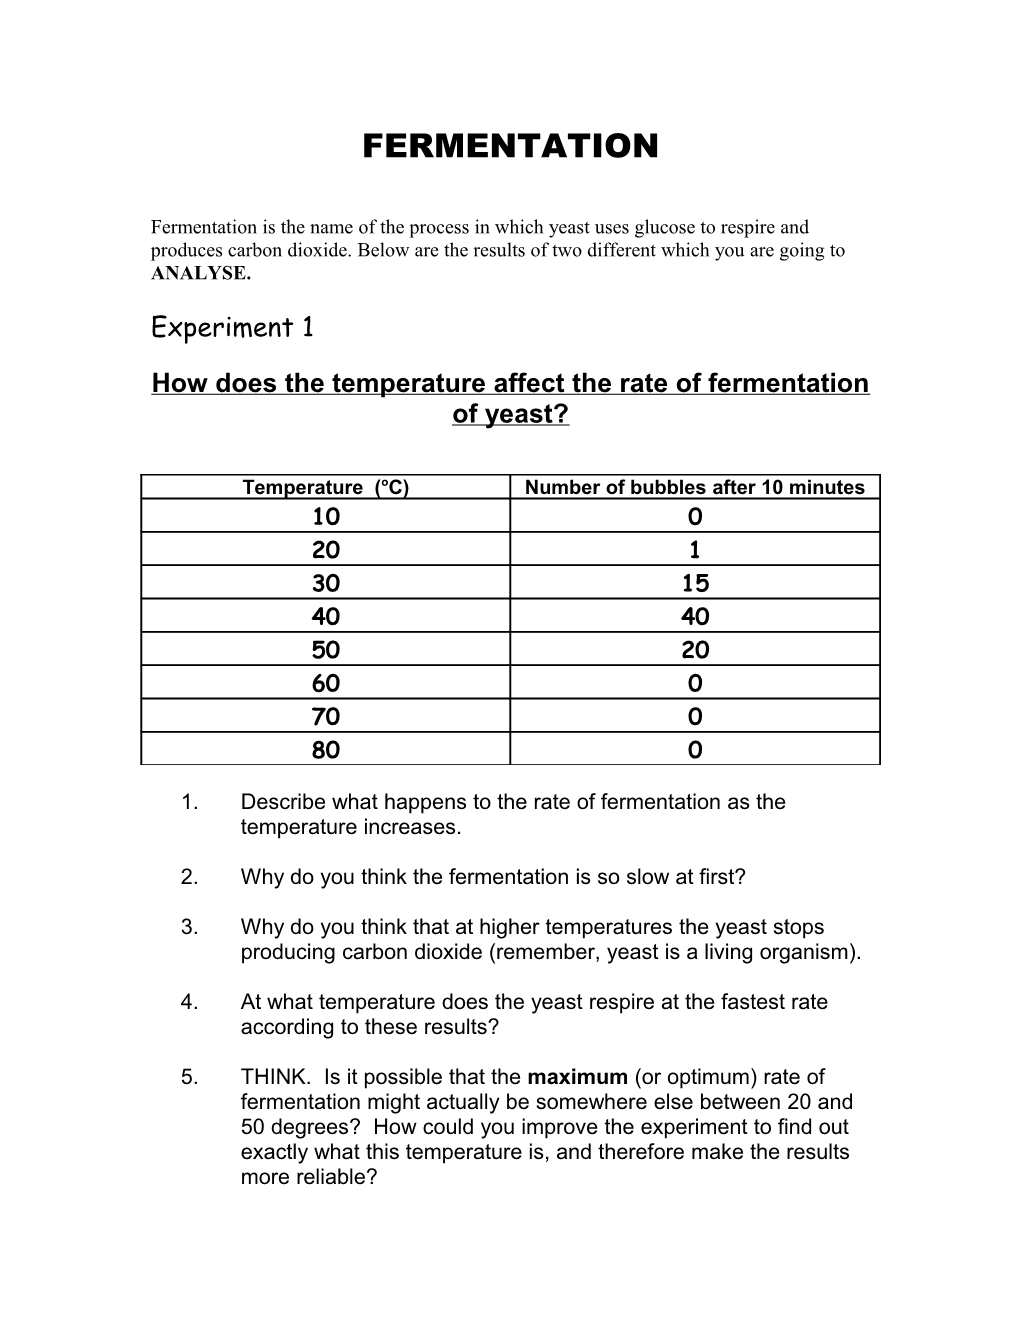 How Does the Temperature Affect the Rate of Fermentation of Yeast?